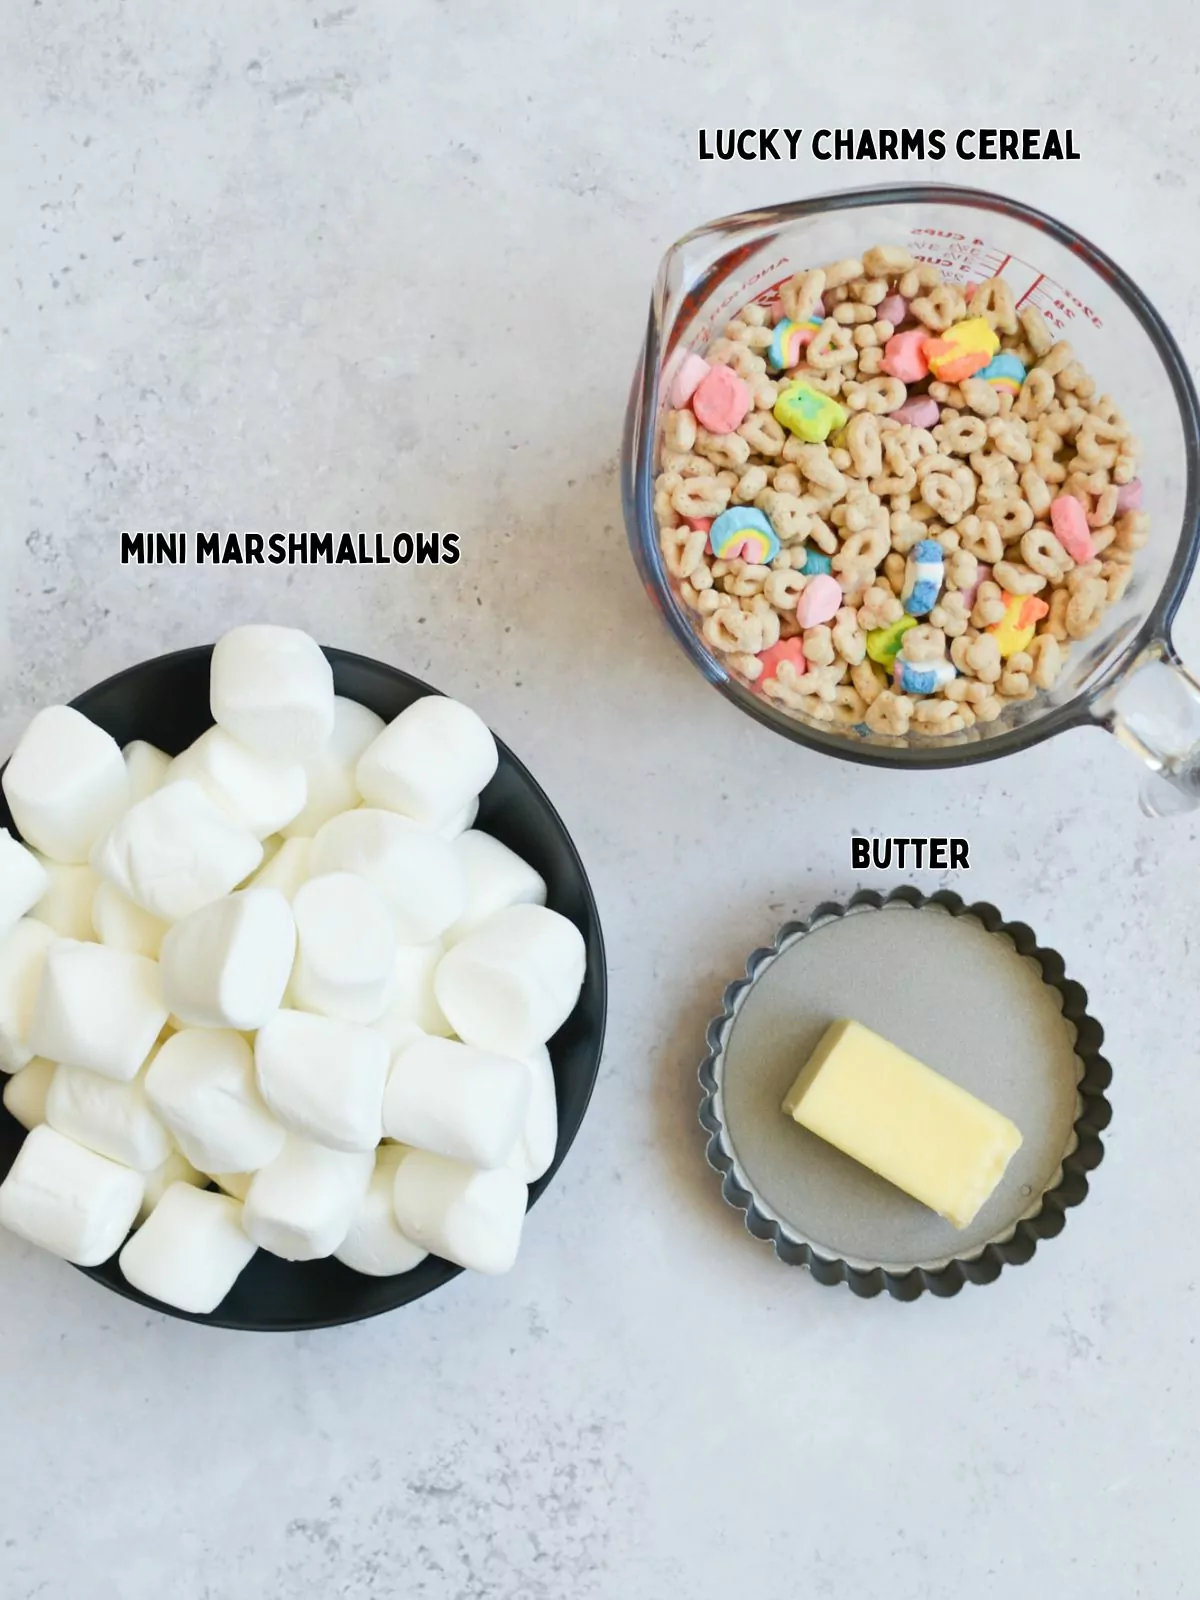 ingredients for cereal bars with mini marshmallows.